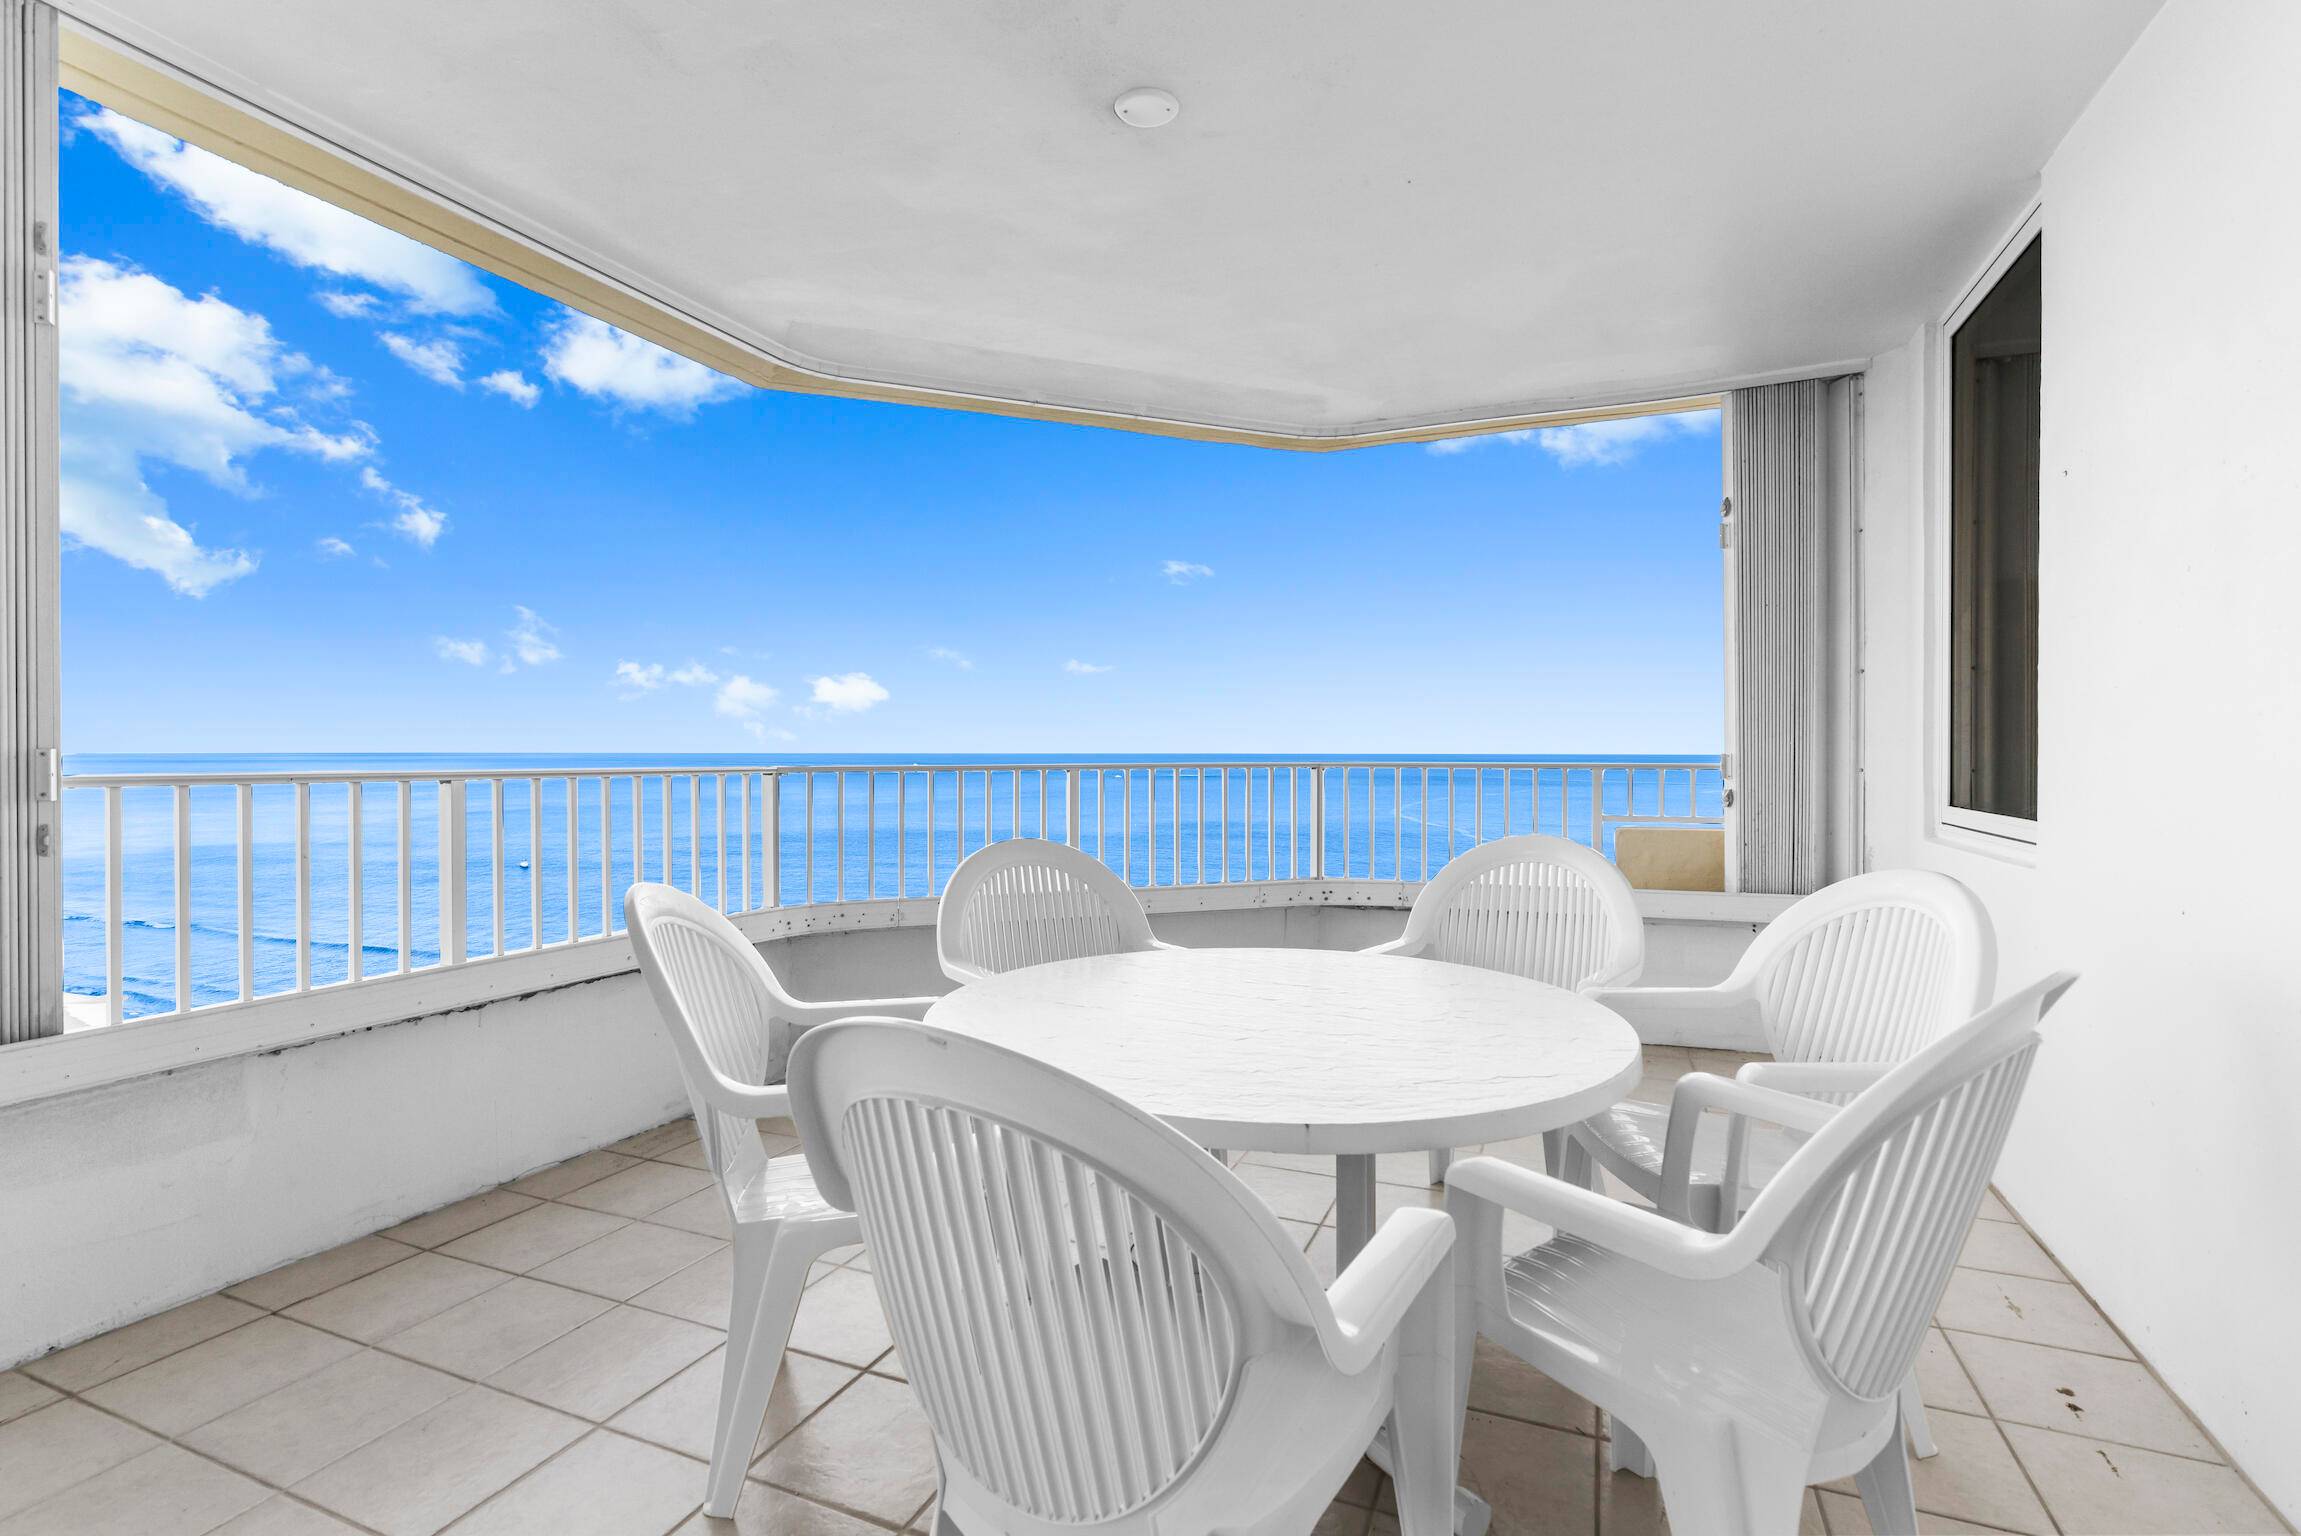 Experience the epitome of beachfront living in this stunning Boca Raton condo, uniquely positioned directly on the sand.